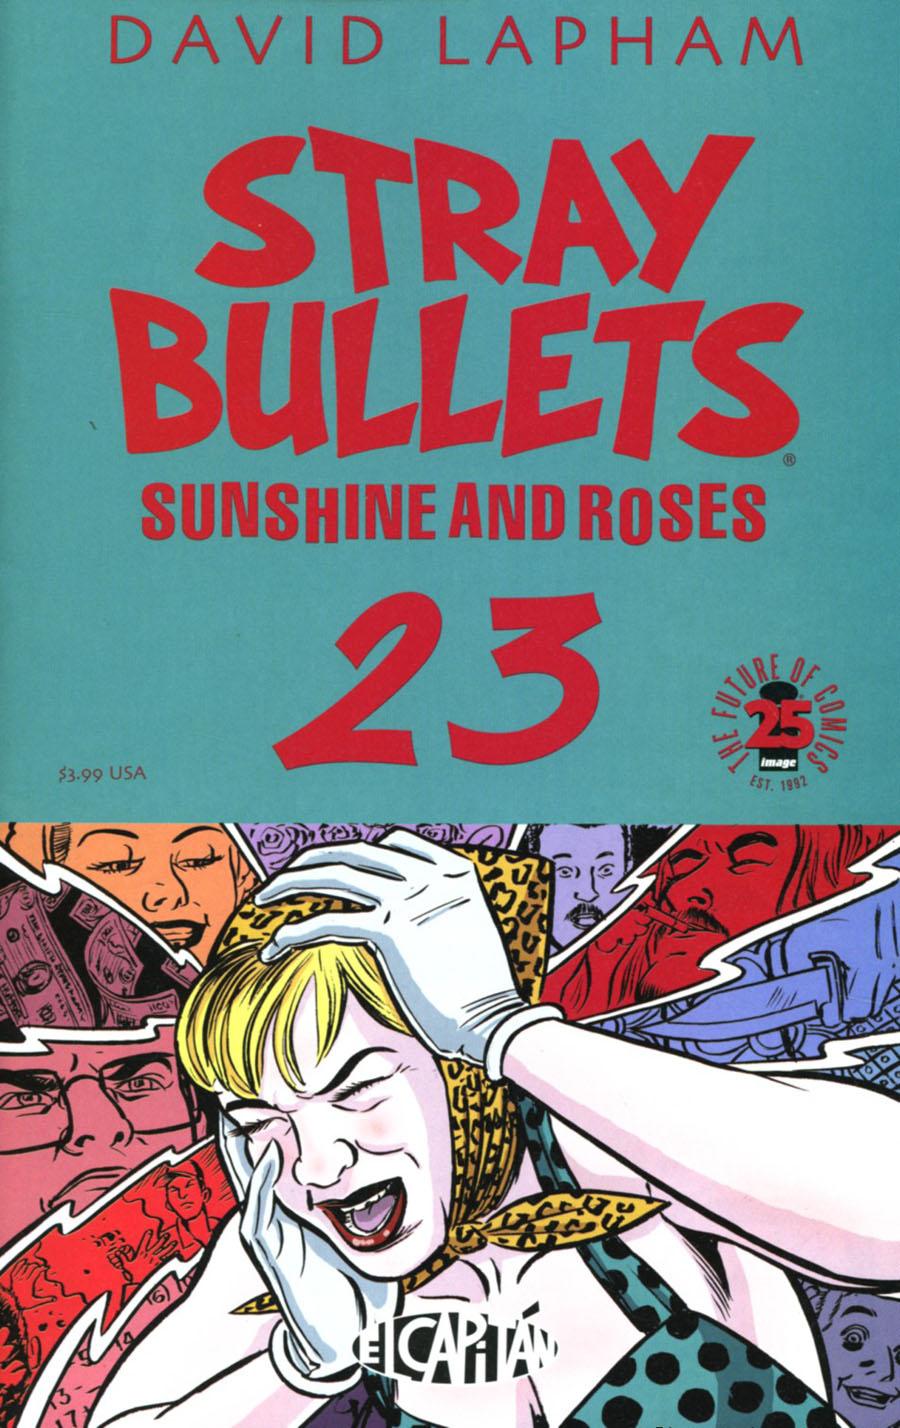 Stray Bullets Sunshine And Roses Vol. 1 #23